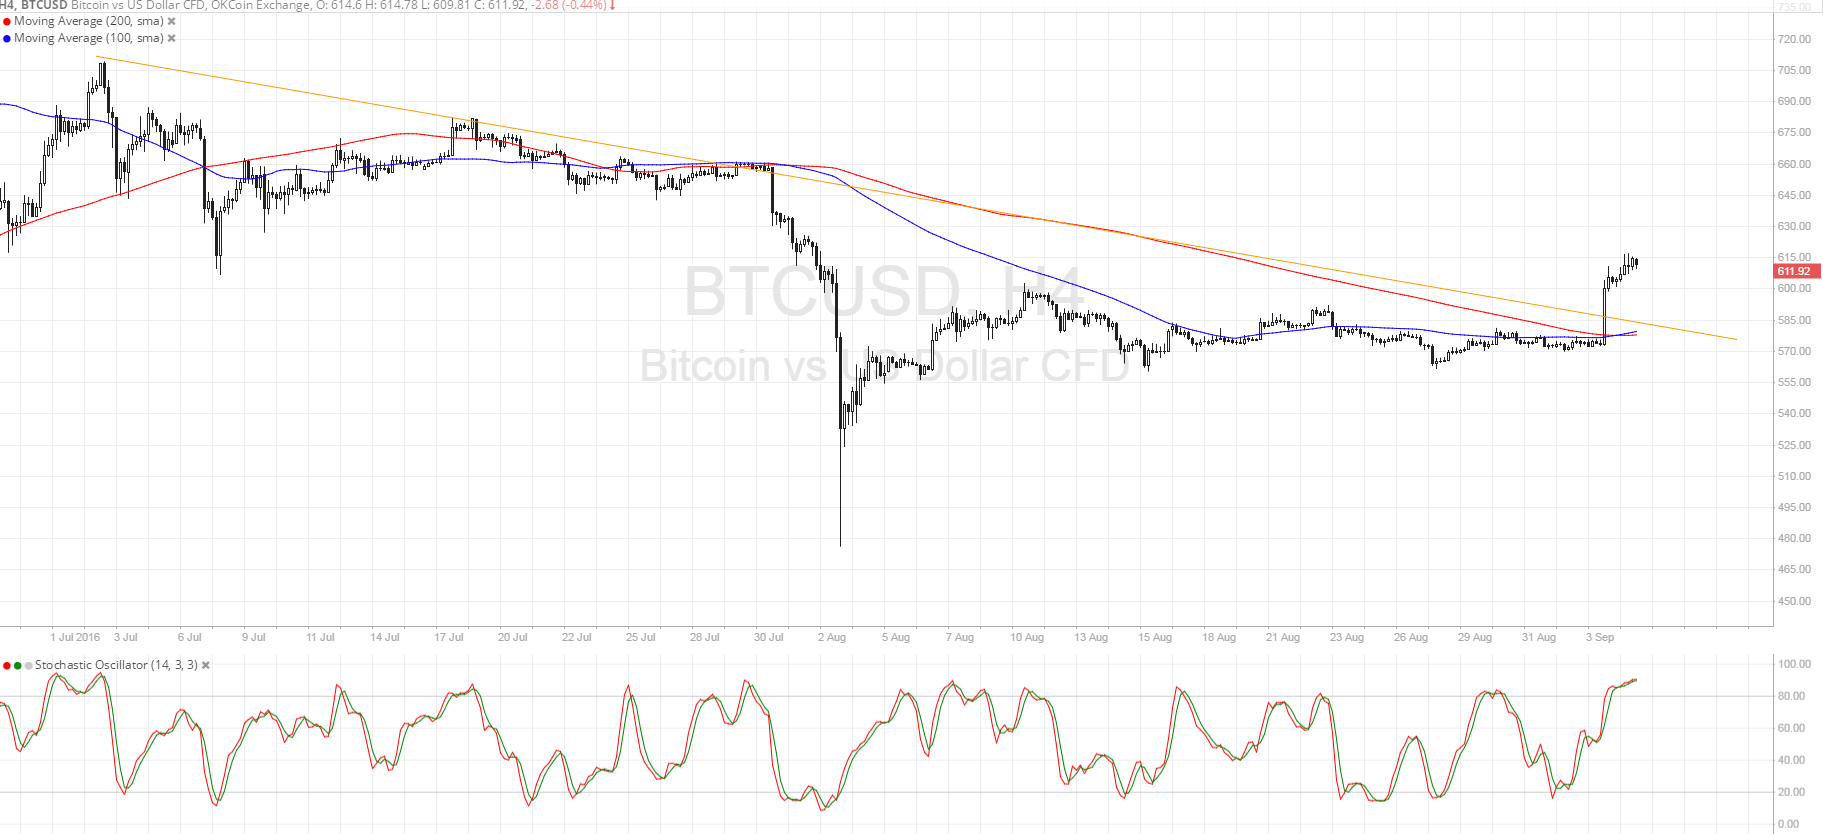 Bitcoin Price Technical Analysis for 09/05/2016 - Bulls Are Charging!